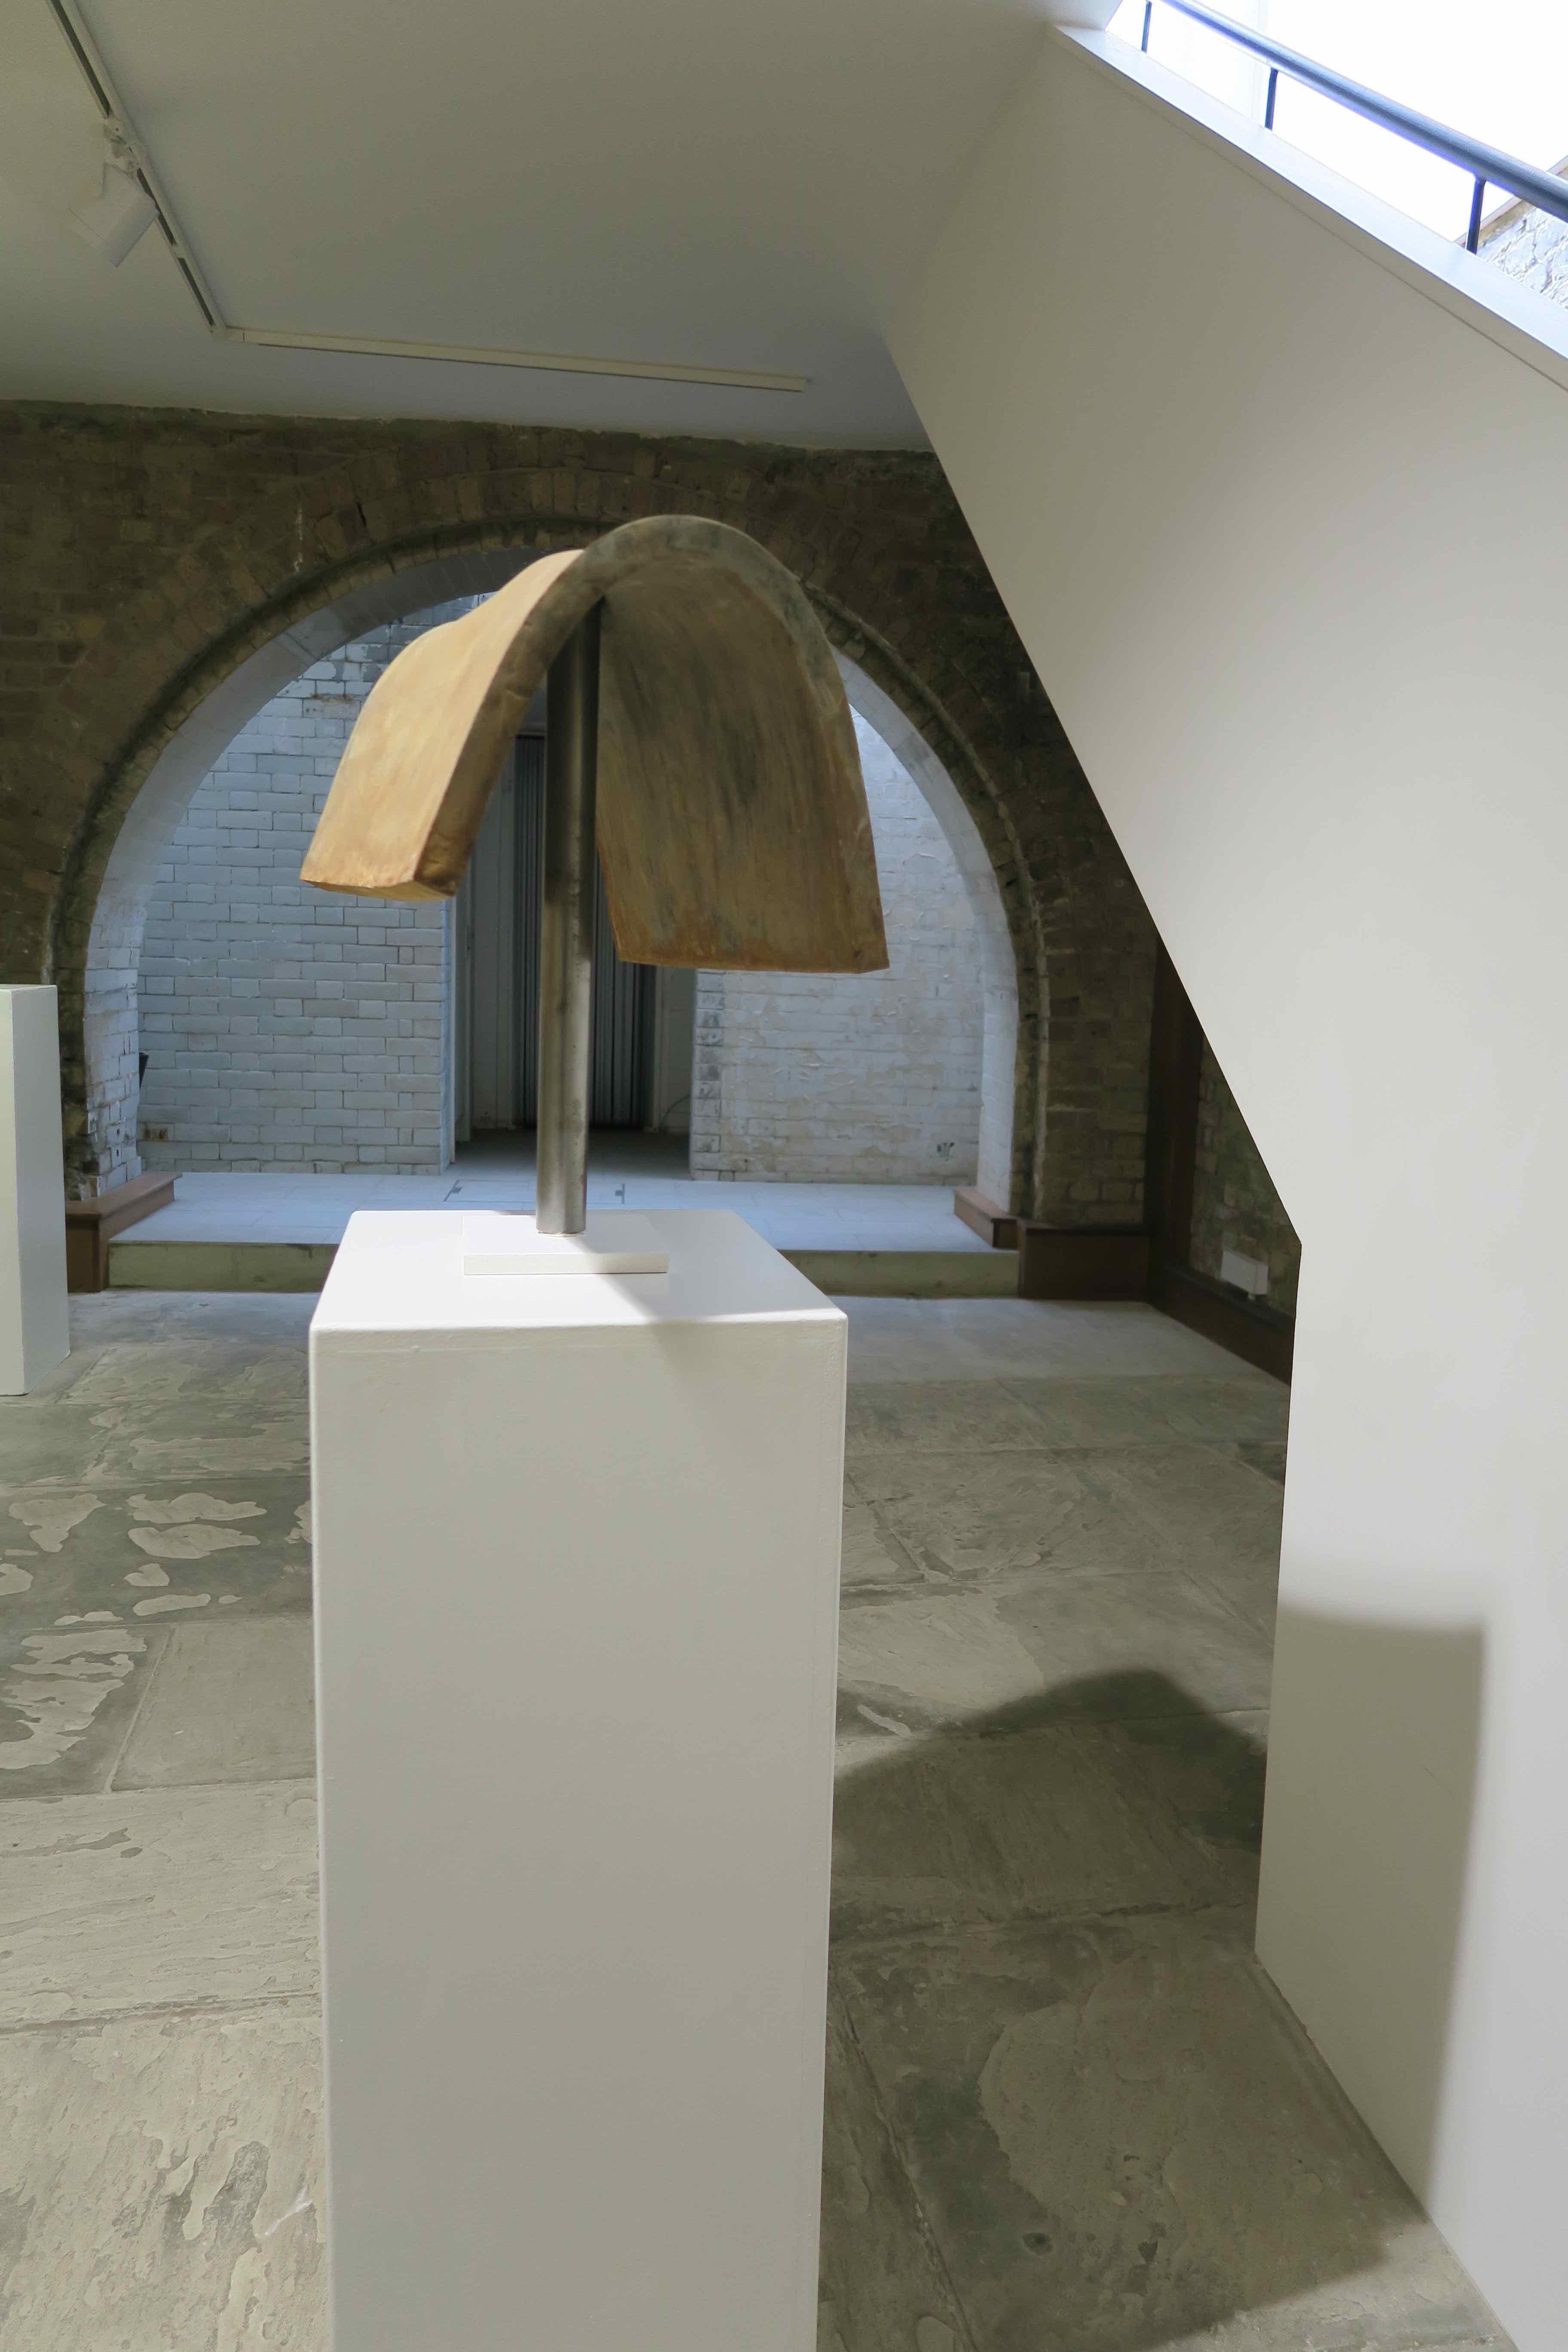 Through subtle alterations of surroundings, Kostas’s man made objects are made to seem dysfunctional, and at times disconcerting. These materialised flights of imagination are complex fabrications that have the contrasting appearance of being